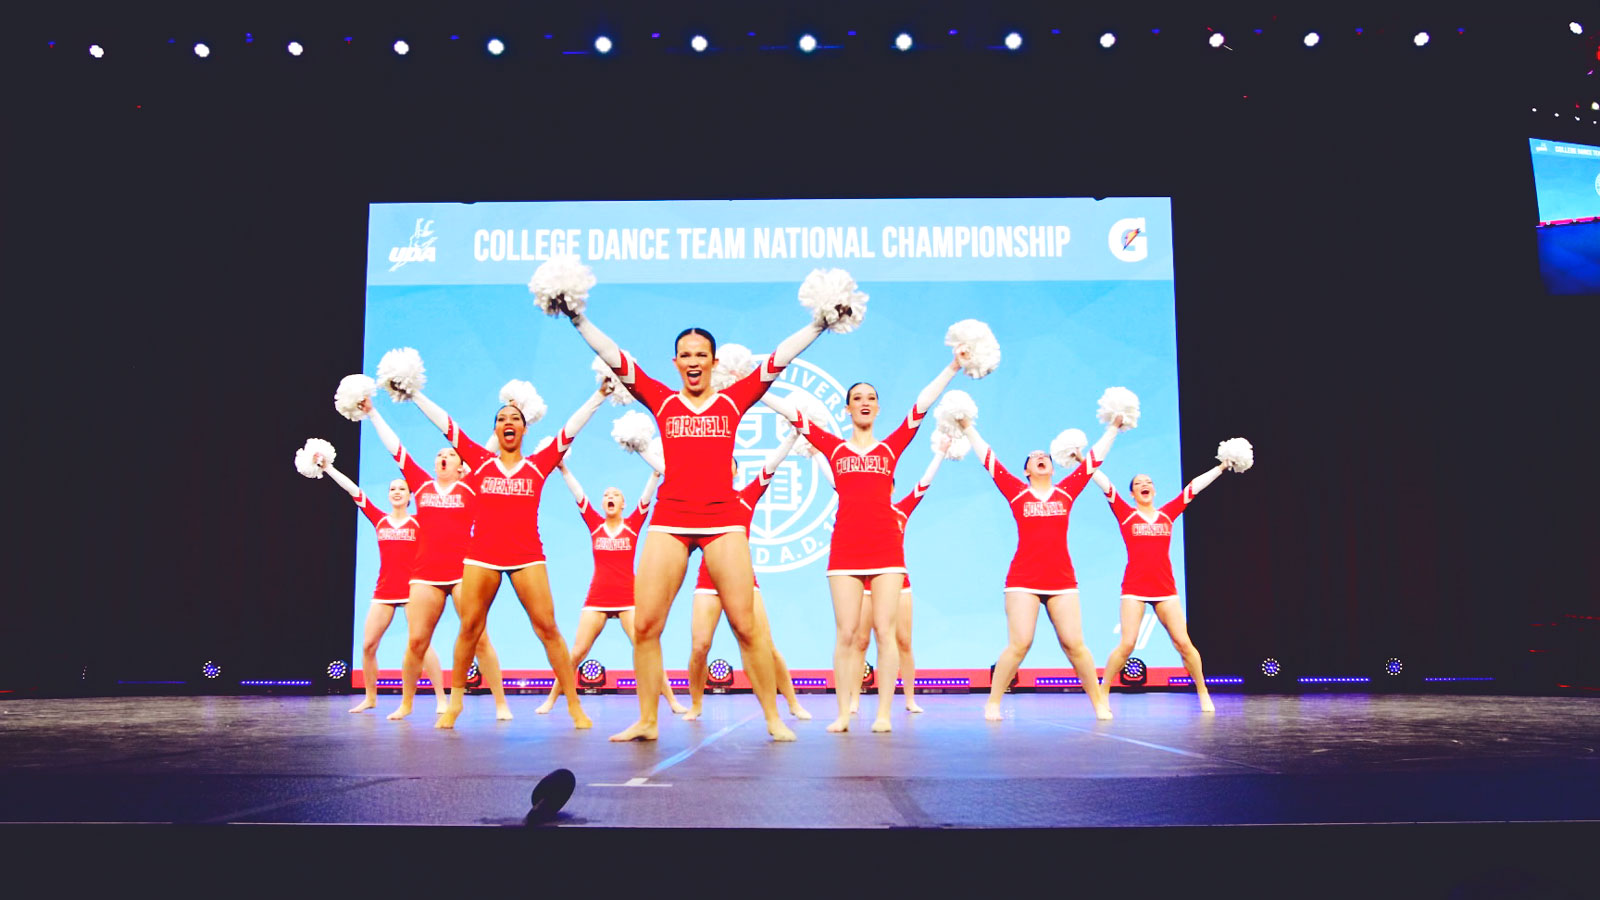 The Cornell University Dance Team members raise their pompoms and cheer on stage during their performance at the College Dance Team National Championship.